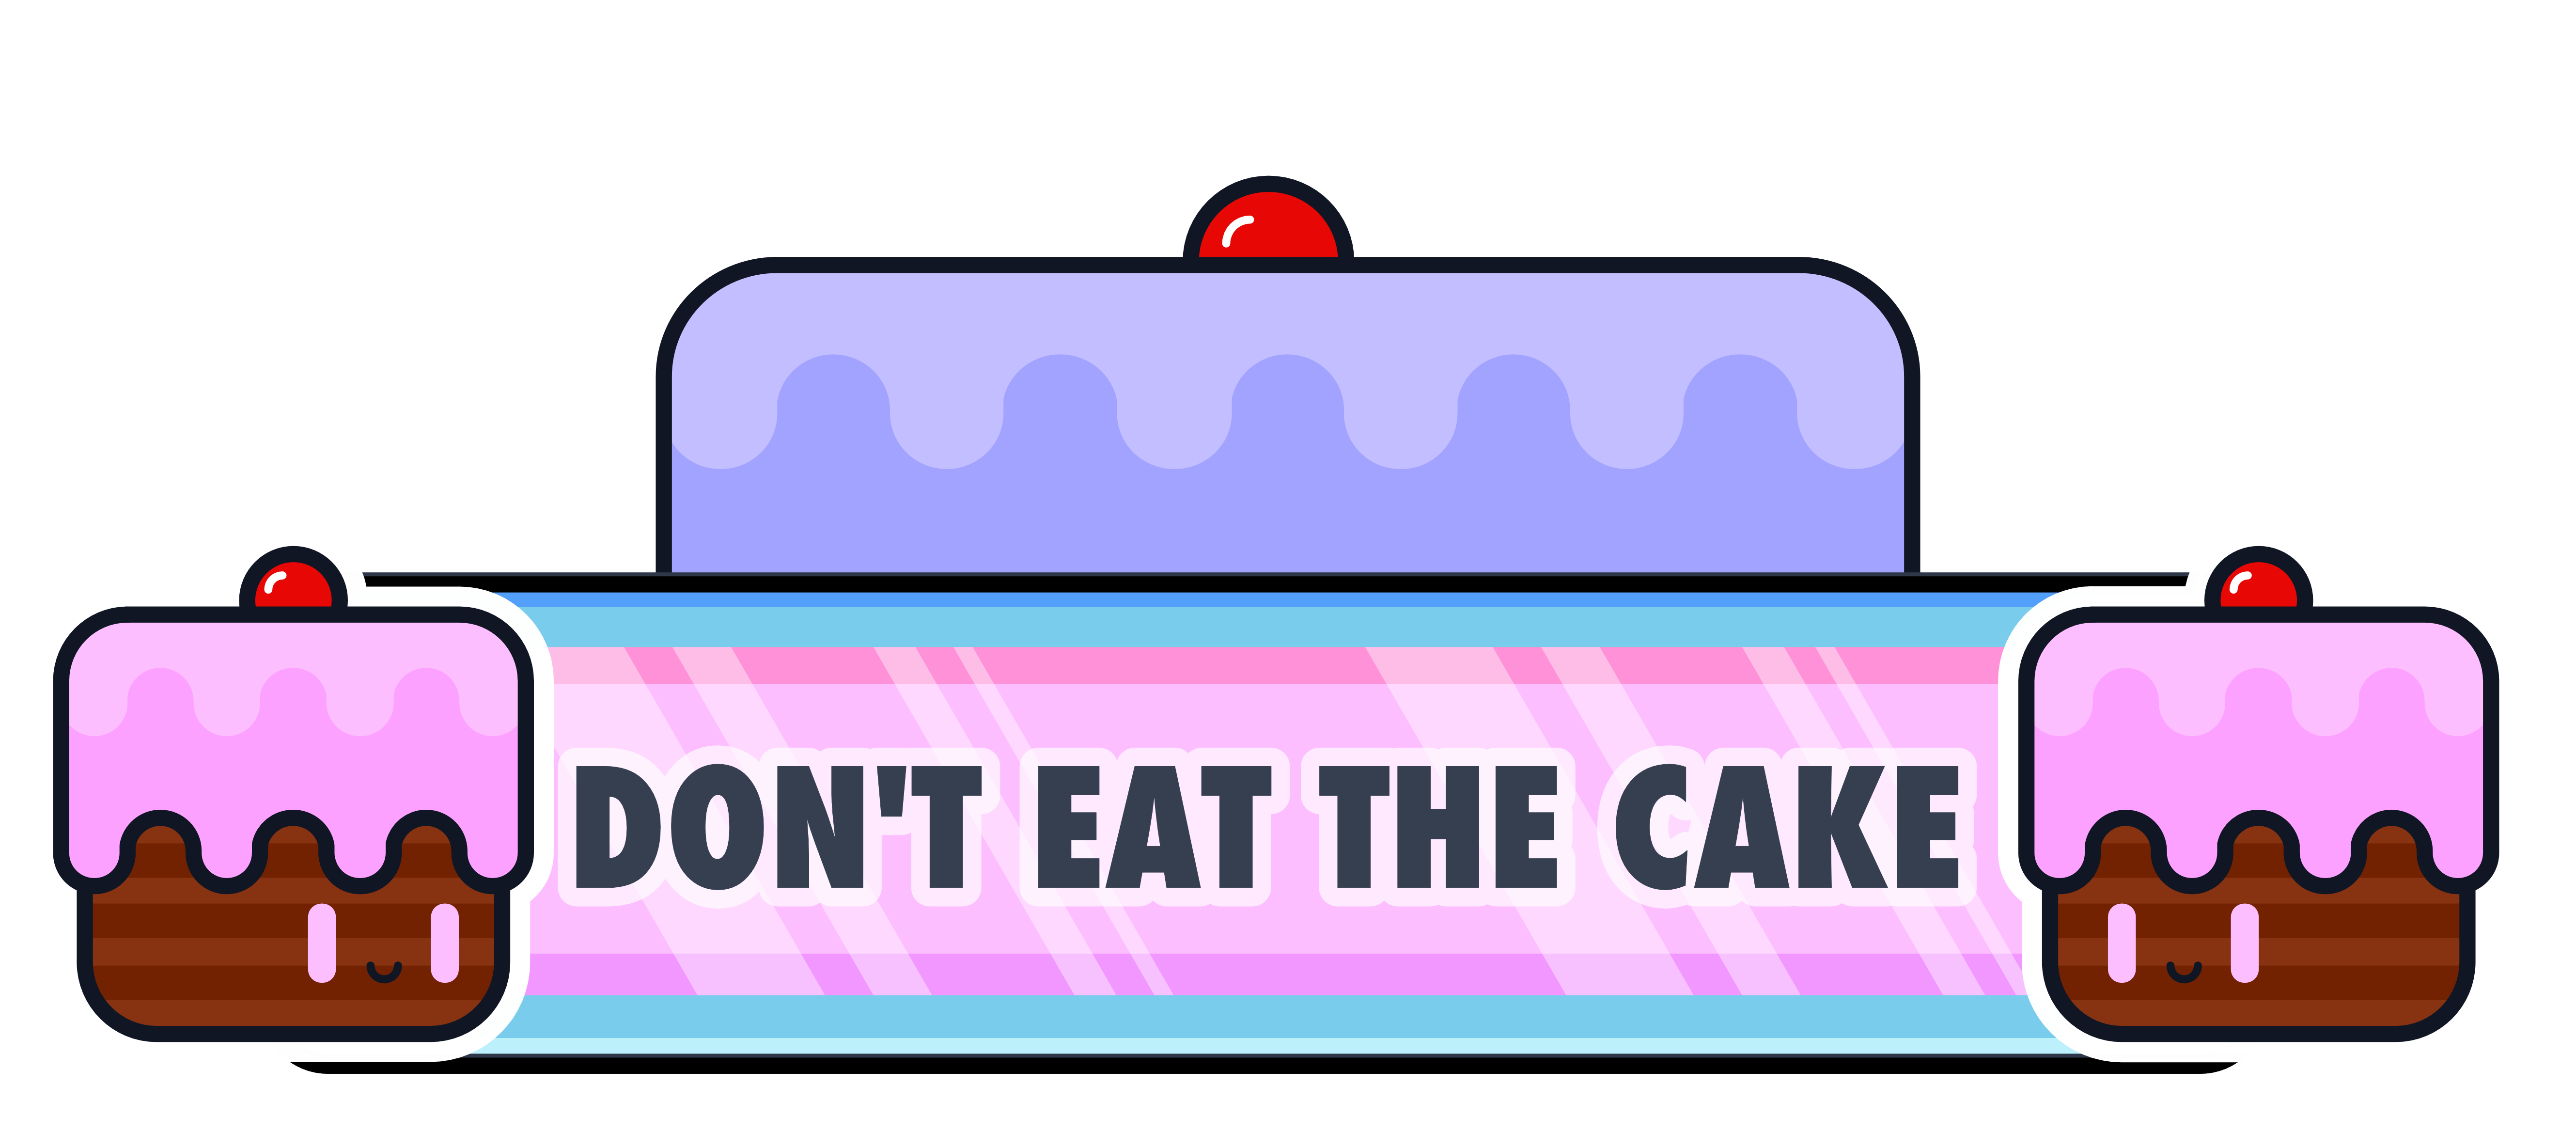 DON'T EAT THE CAKE